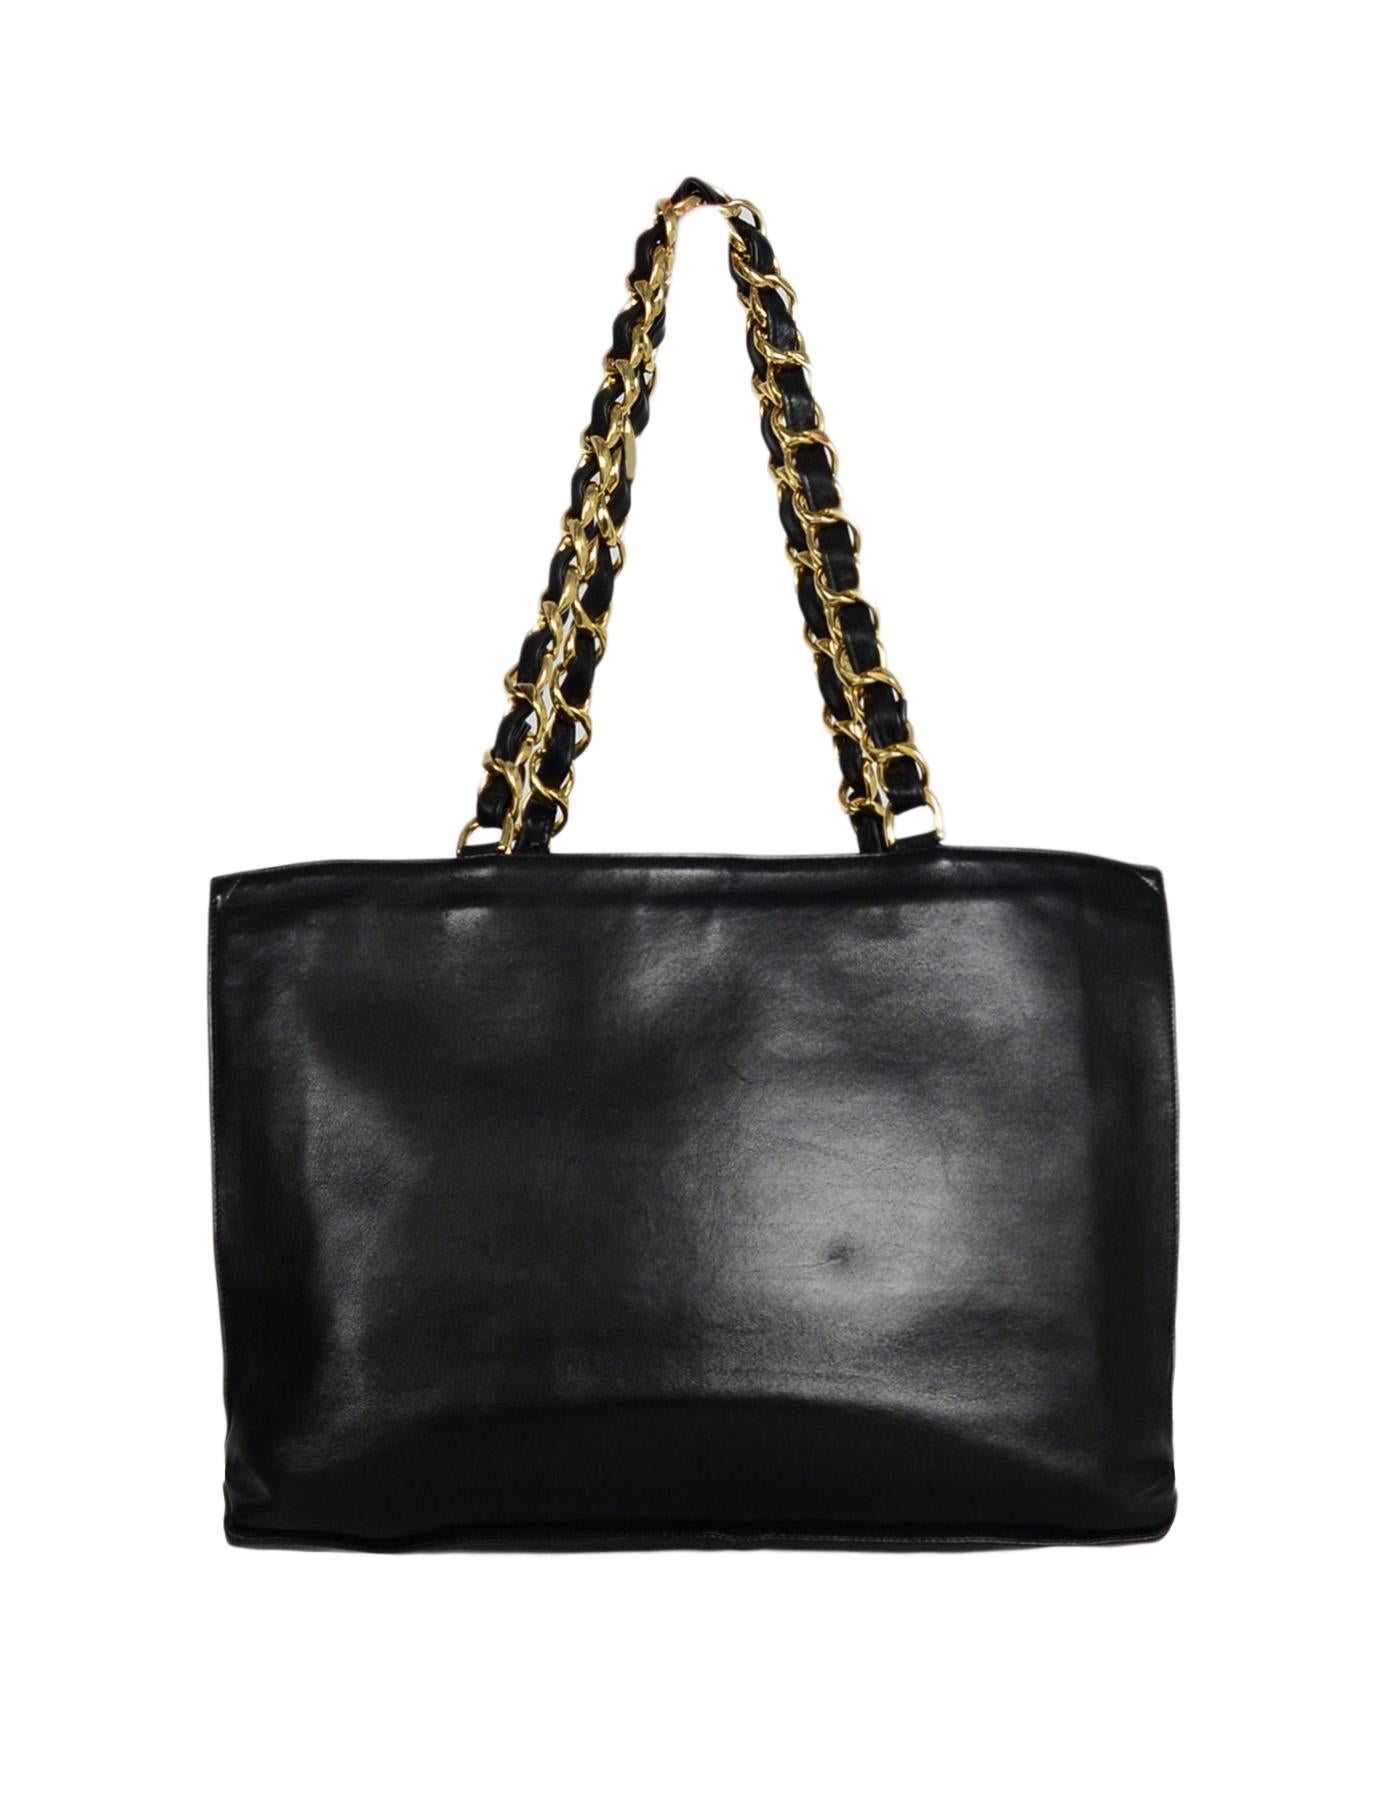 Chanel Black Lambskin CC Tote Bag. Features gold tone leather laced heavy chain strap

Made In: France
Year of Production: 1990s
Color: Black
Hardware: Gold tone
Materials: Lambskin leather, metal
Lining: Black leather
Closure/Opening: Open